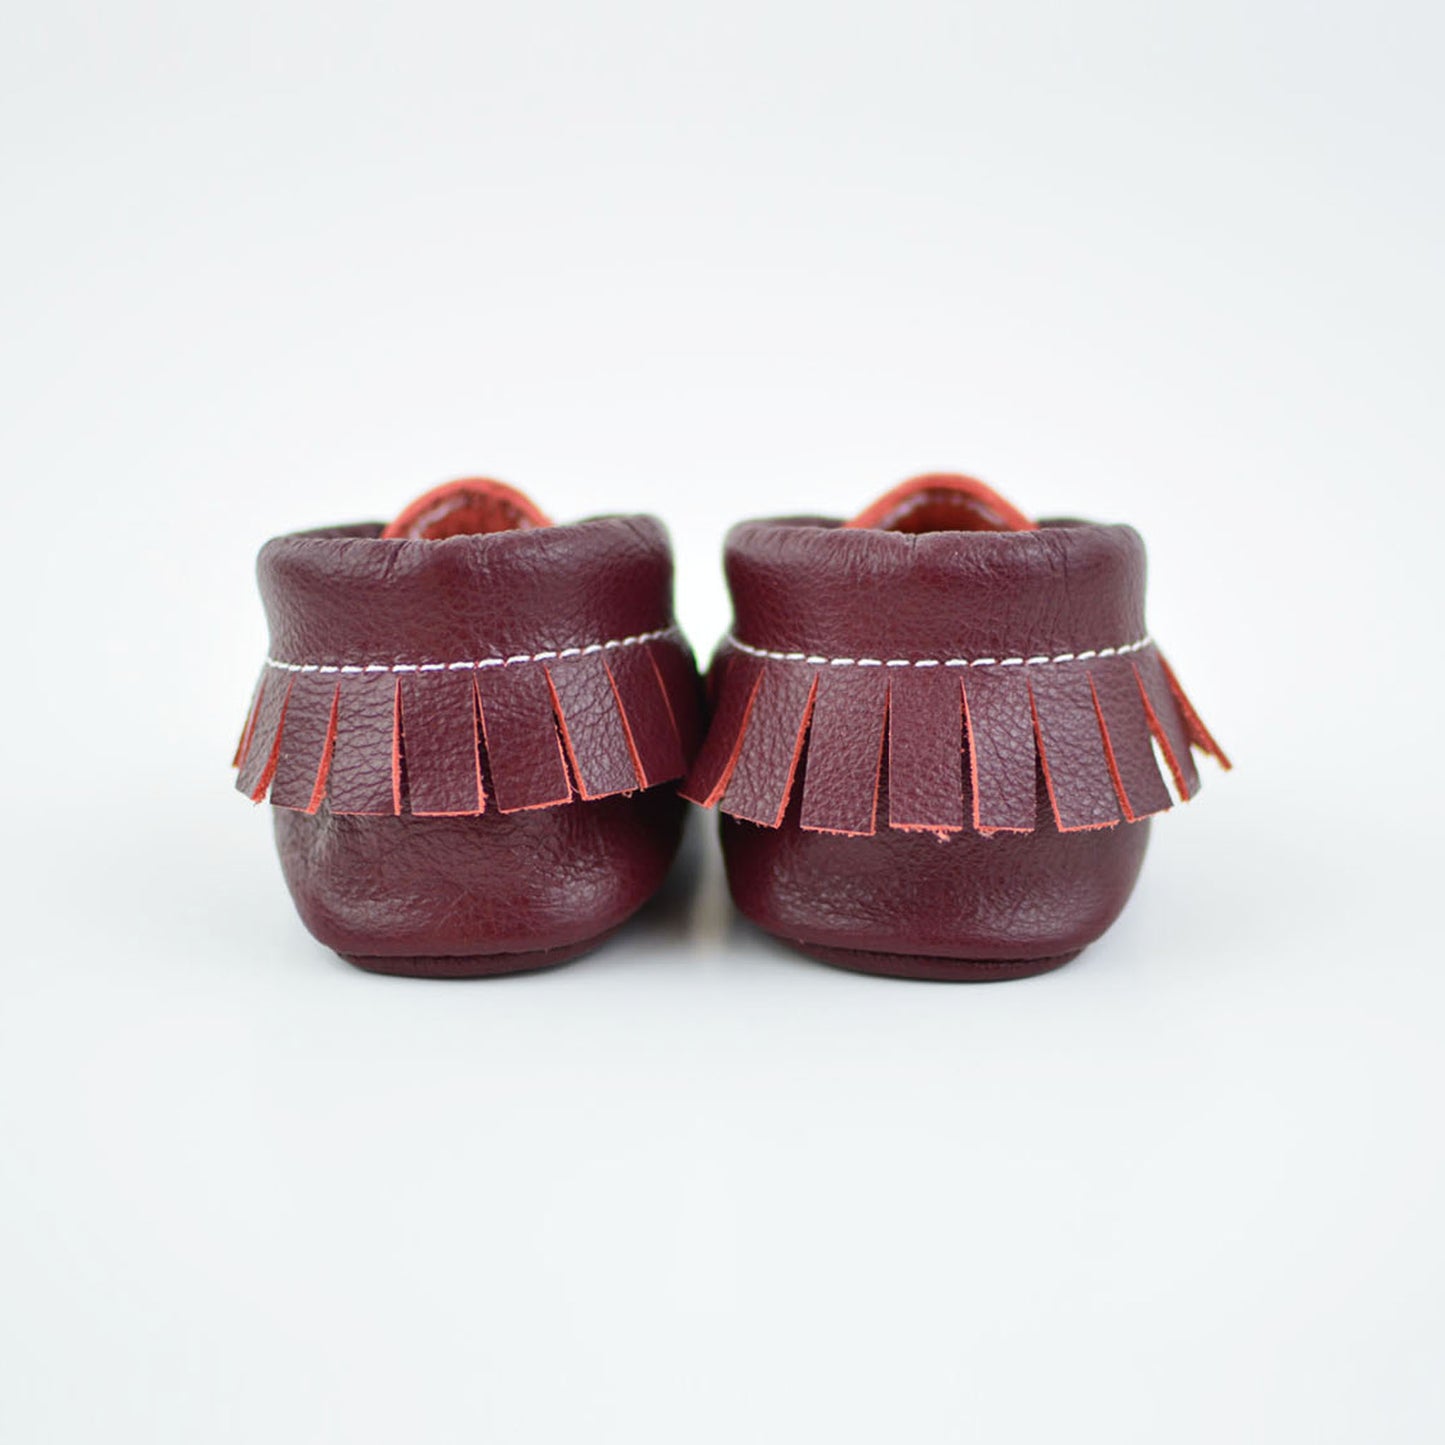 RTS Burgundy Moccasins With Same Leather Soles - Size 3 (12-18M)(5")